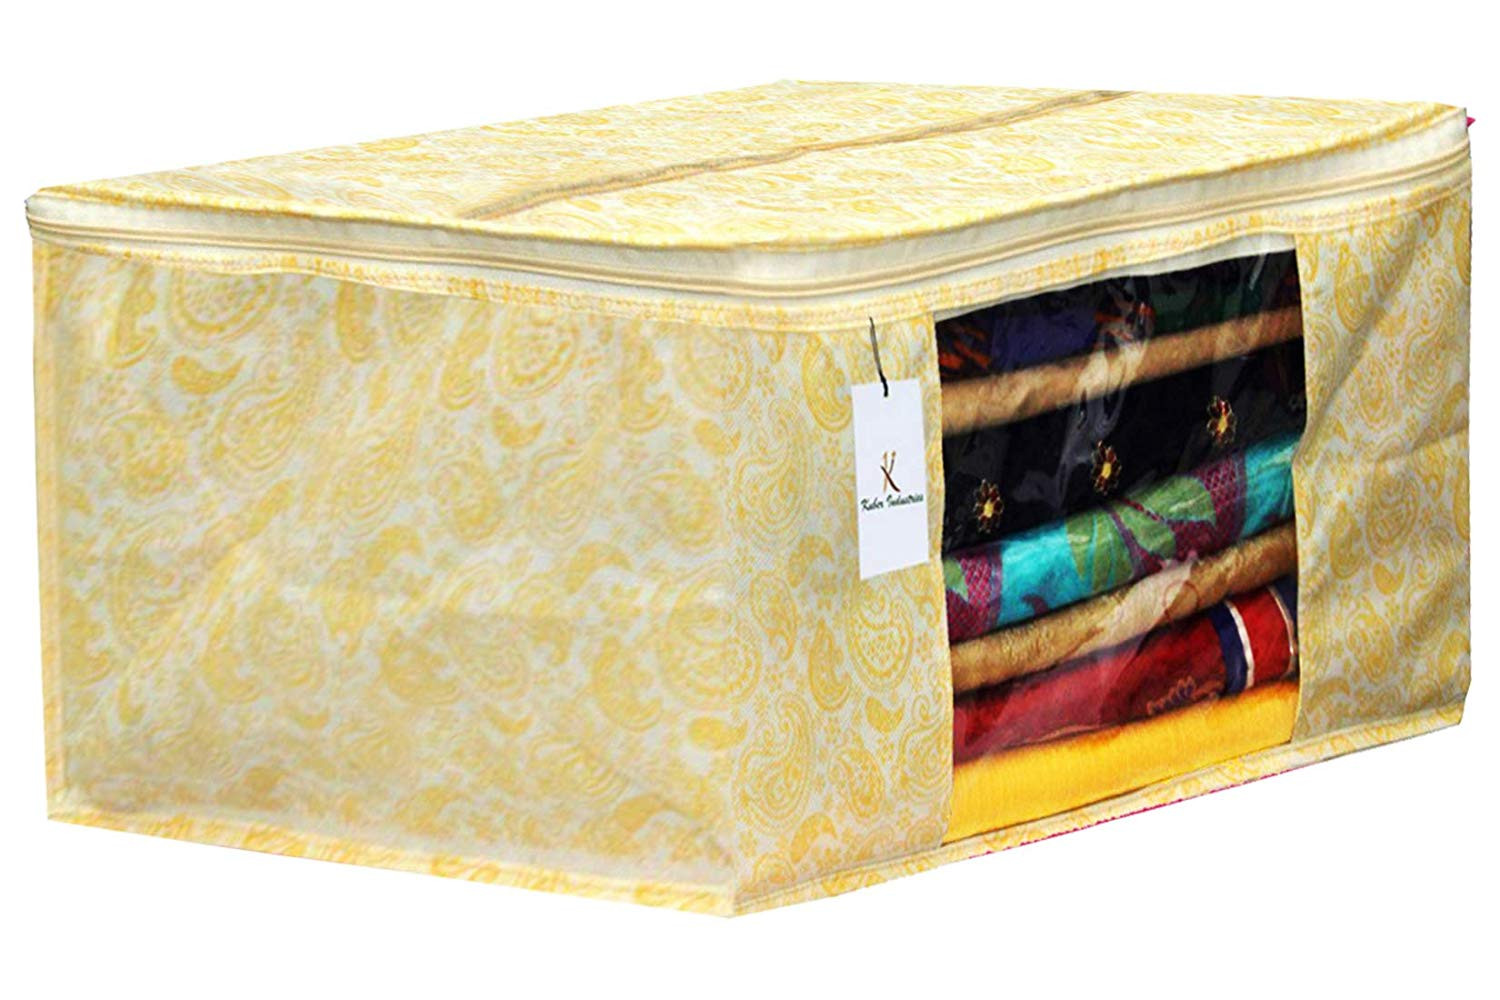 Kuber Industries Metalic Printed Non Woven Saree Cover And Underbed Storage Bag, Storage Organiser, Blanket Cover, Gold & Red & Beige  -CTKTC42403